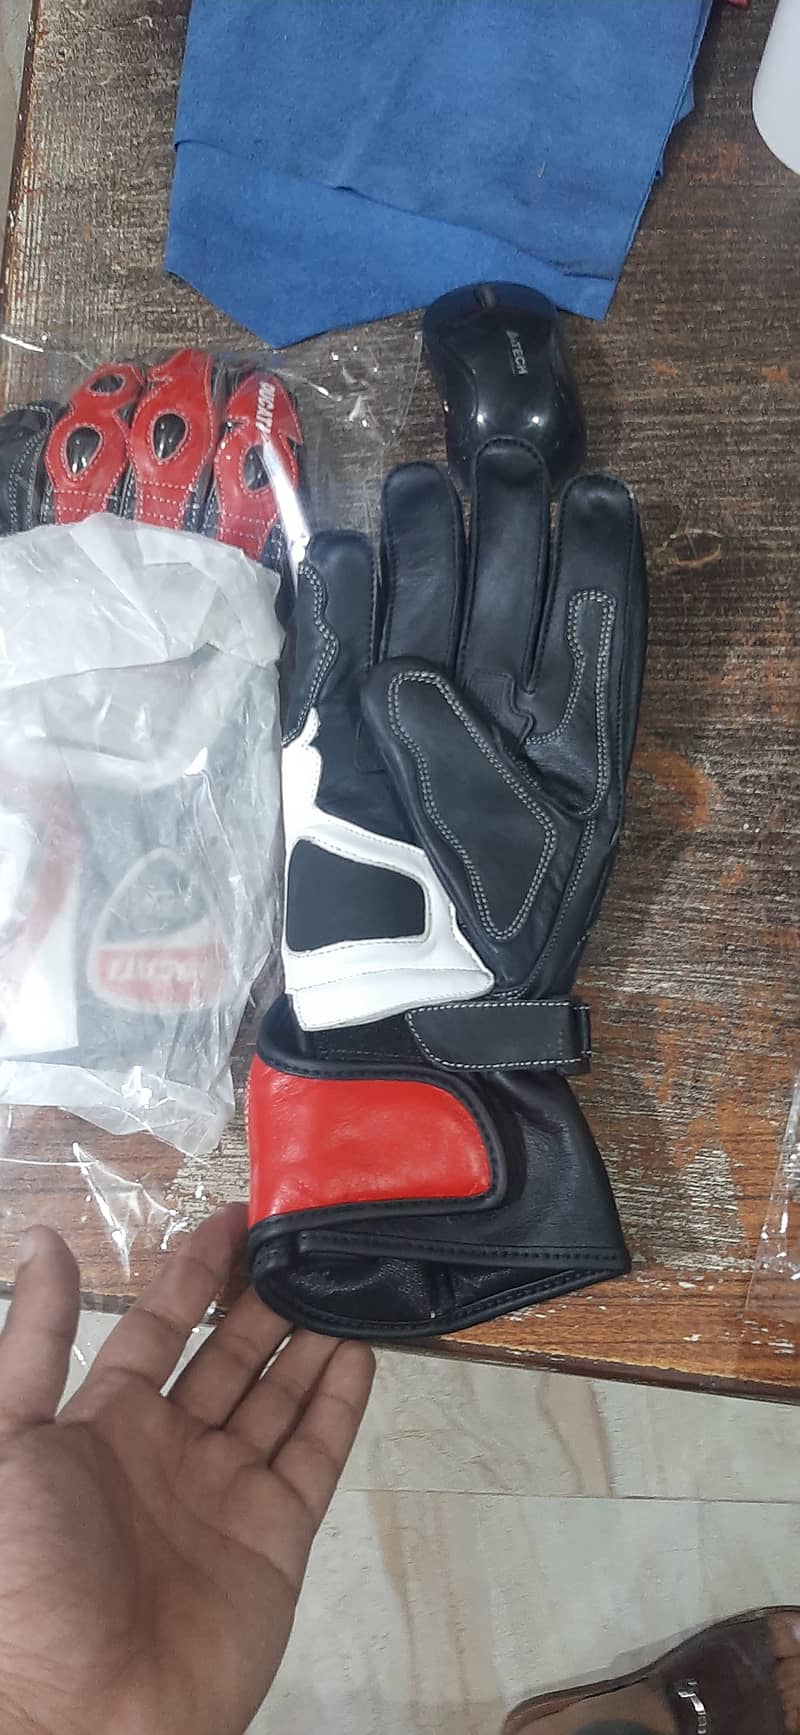 Motorcycle Riding Motocross Gloves full safety procation export qualit 4